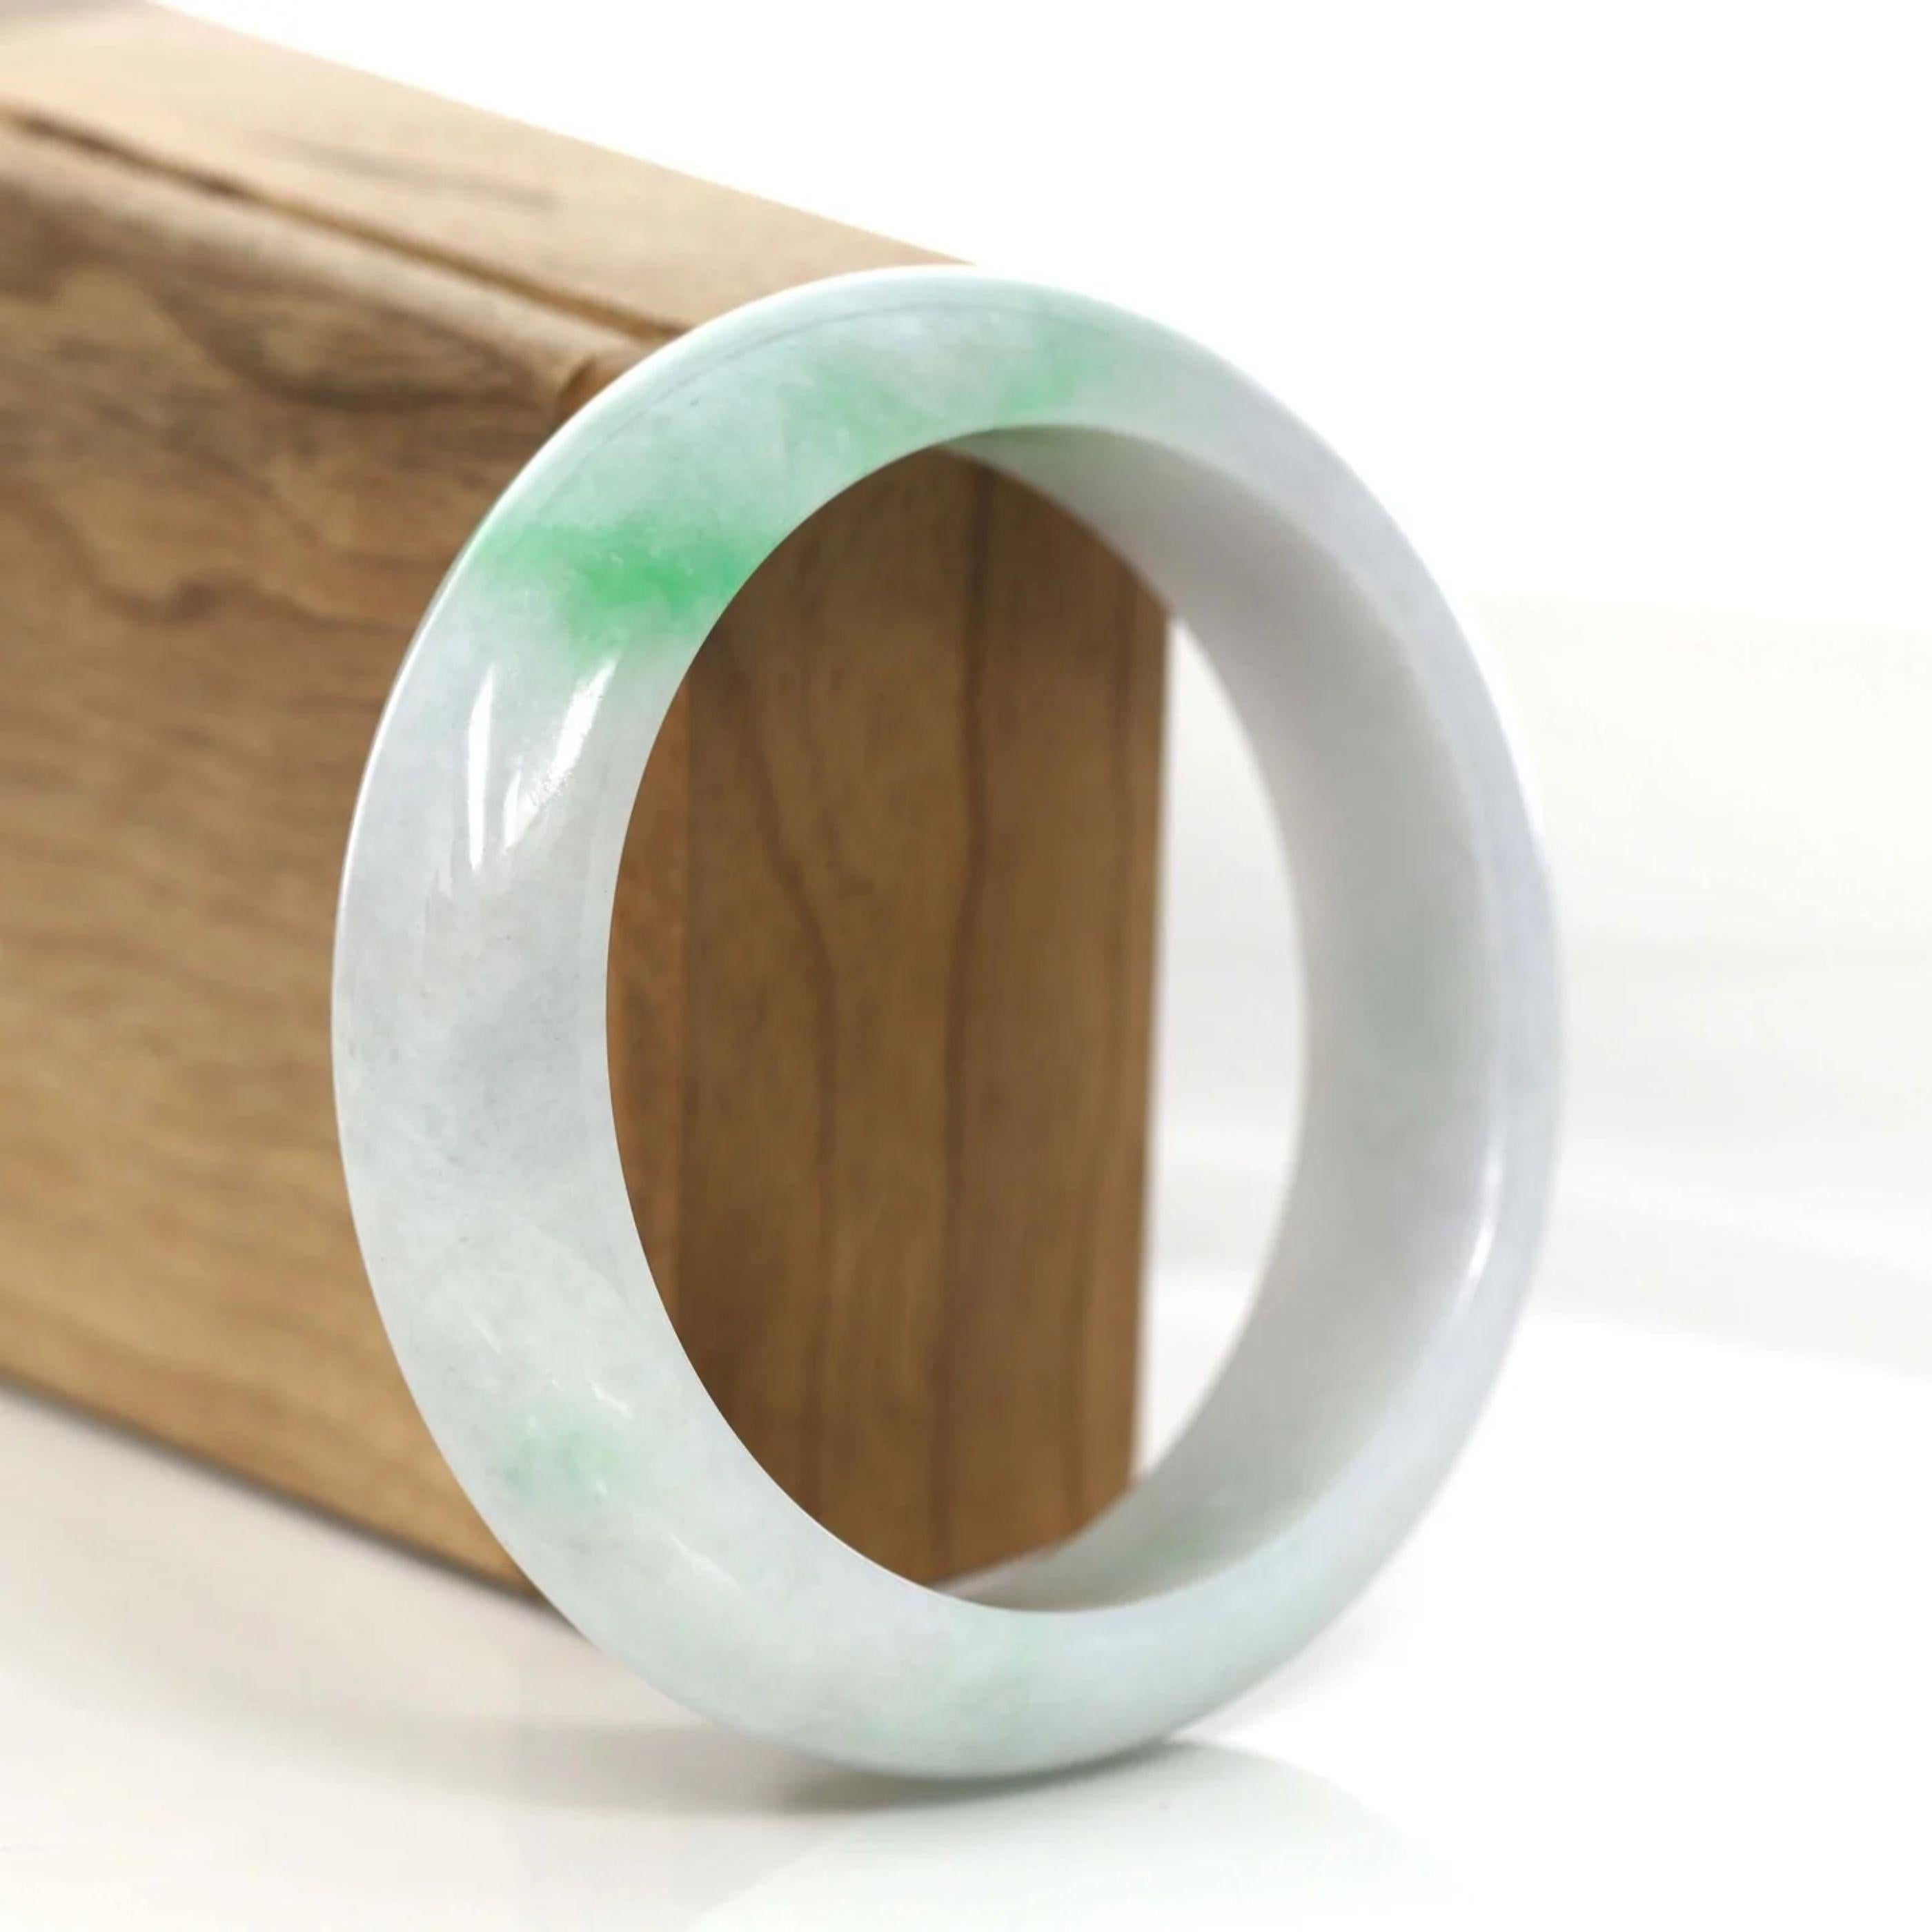 * DETAILS--- This bangle is made with high-quality genuine Burmese white Jadeite jade, the jade texture is so transparent with some green colors inside. The green color and transparency white texture, truly a mesmerizing combination. The Classic